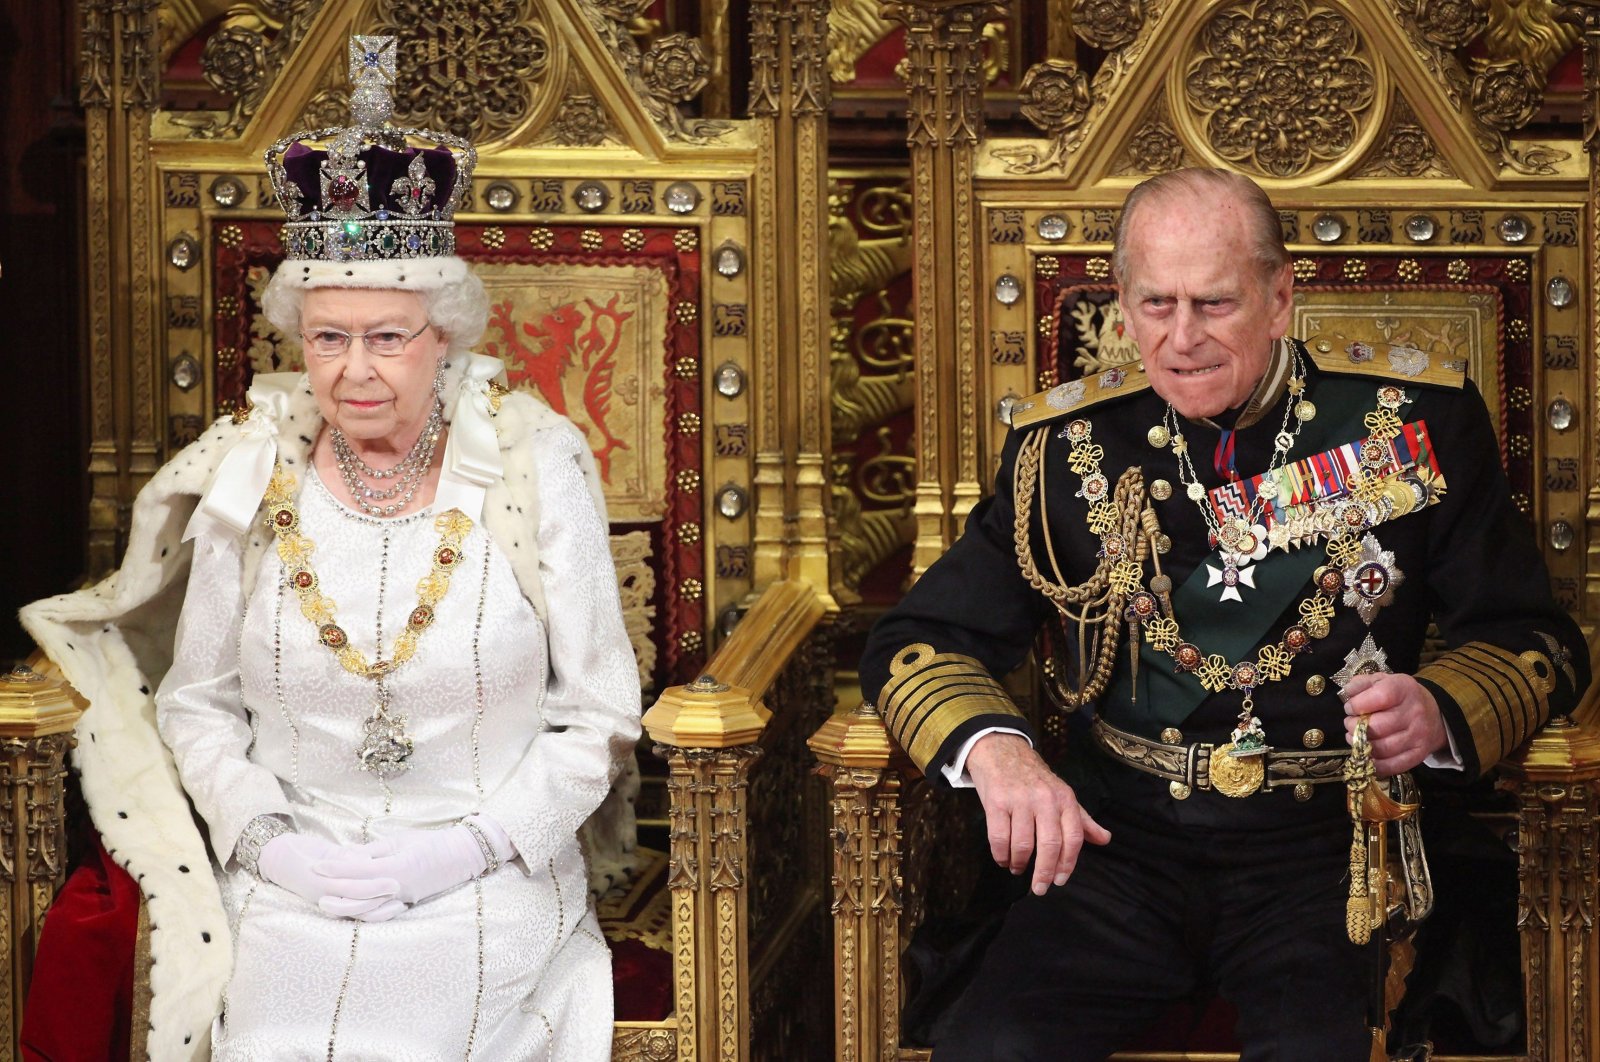 Britain's Queen Elizabeth waits to read the Queen's Speech to lawmakers in the House of Lords, next to Prince Philip, during the State Opening of Parliament in central London May 9, 2012. (Reuters Photo)